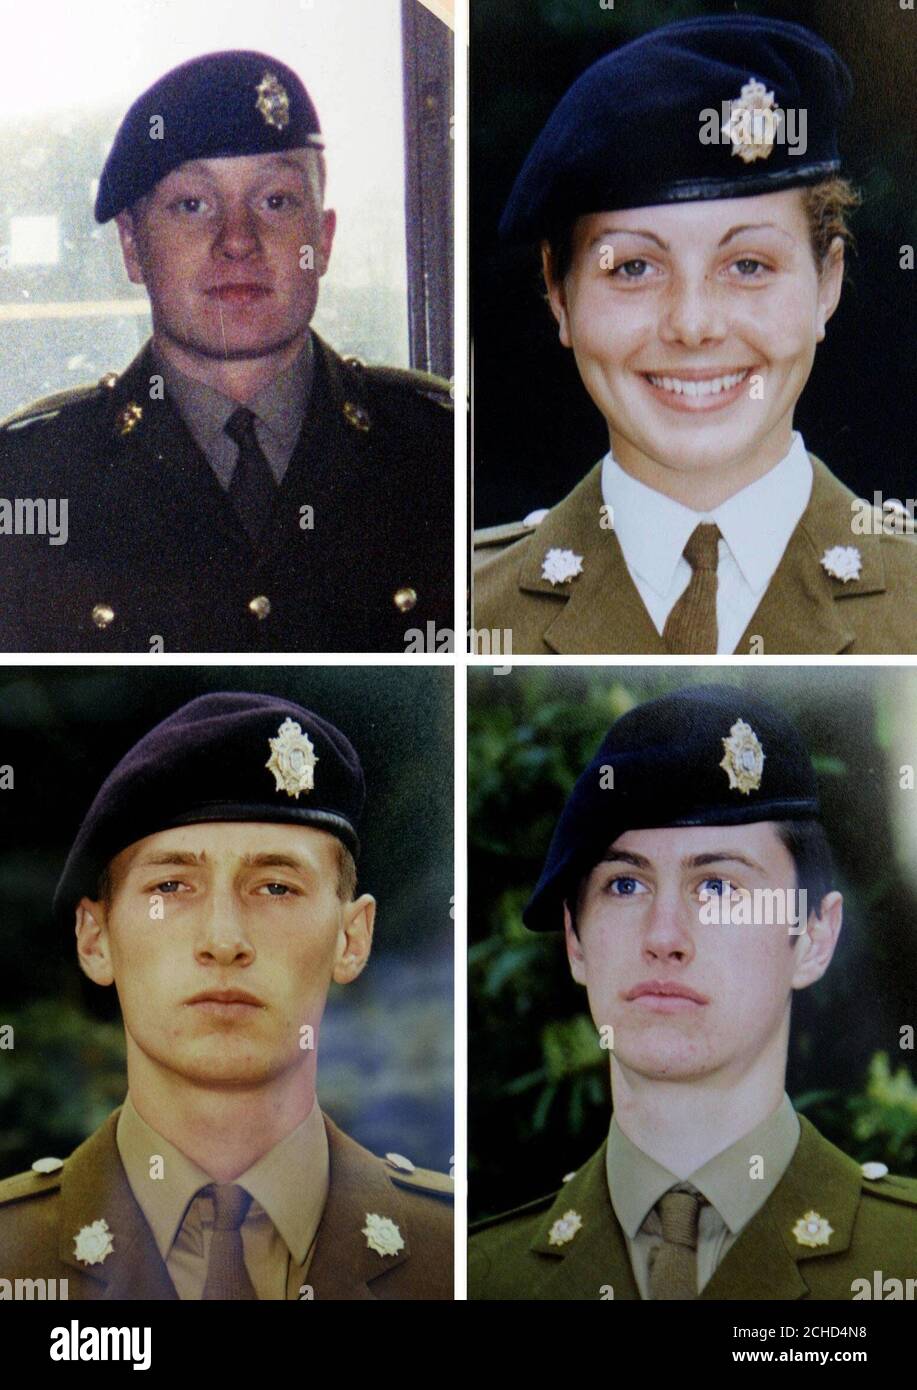 File picture of (Top L-R) Private James Collinson, 17 from Perth, Private Cheryl James, 18, from Llangollen, North Wales, Private Sean Benton from Hastings, East Sussex, and Private Geoff Gray from Seaham, Durham, who all died at Deepcut army barracks in Surrey. Stock Photo